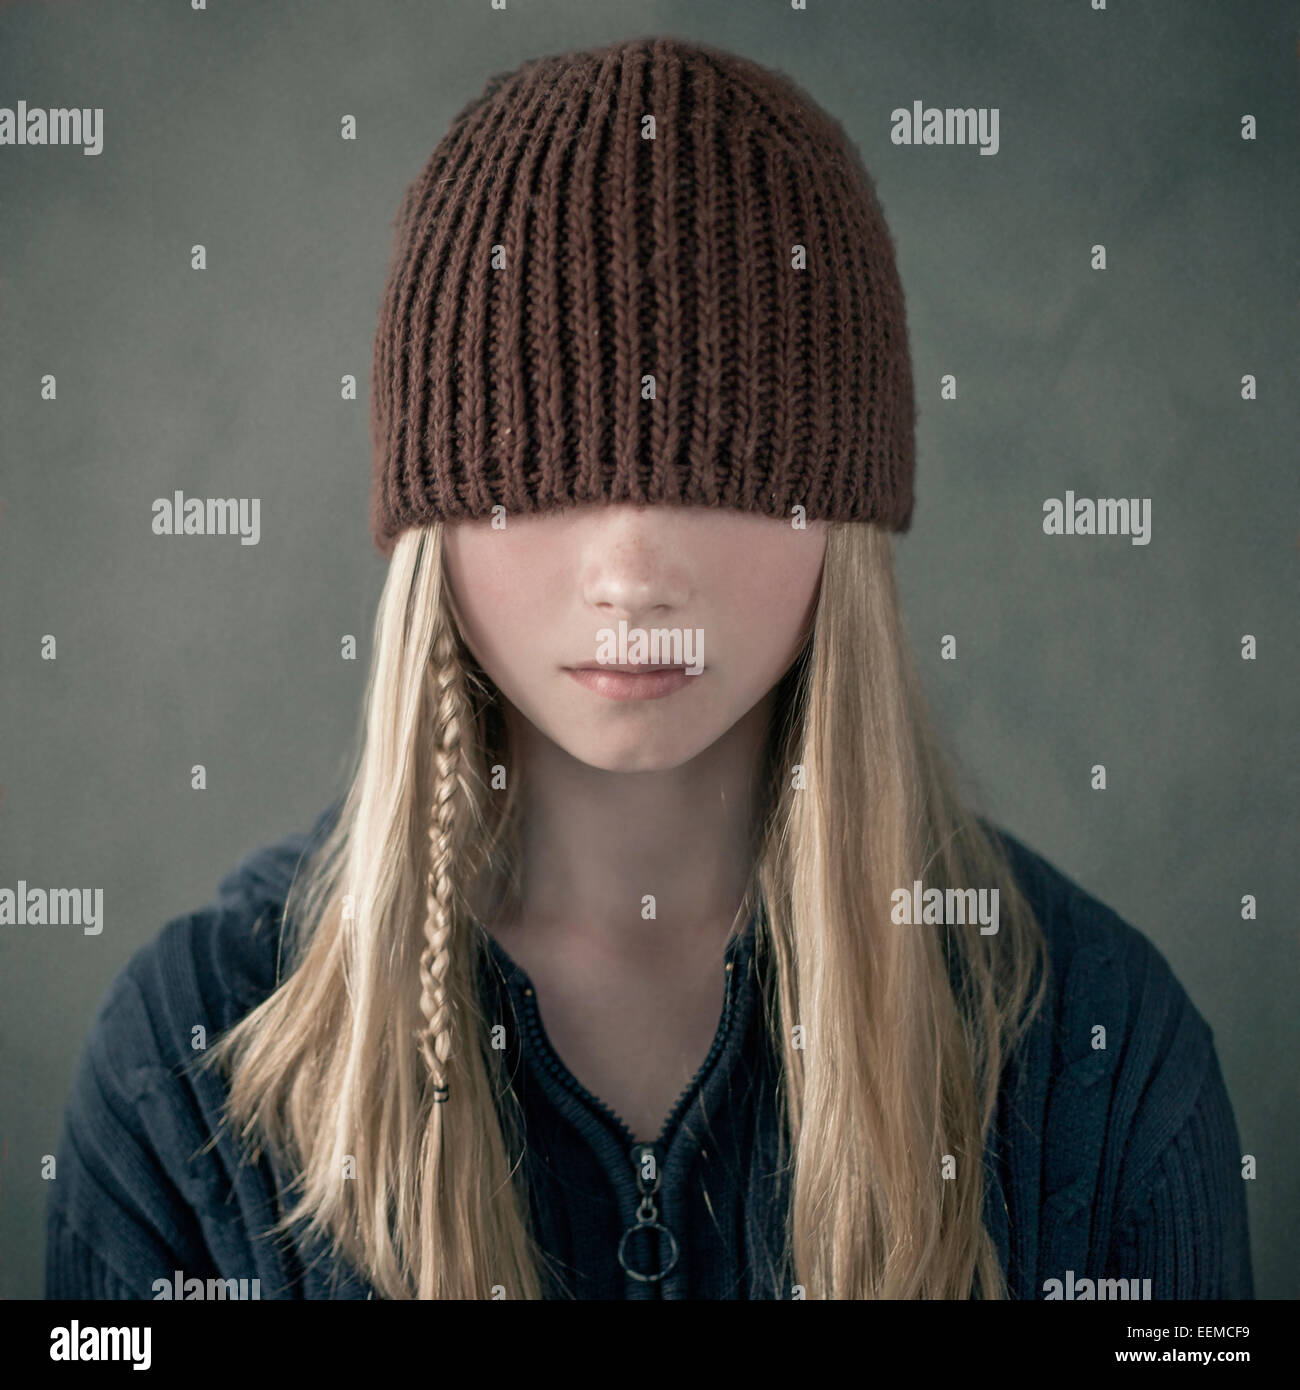 Teenage girl wearing knitted cap over eyes Stock Photo